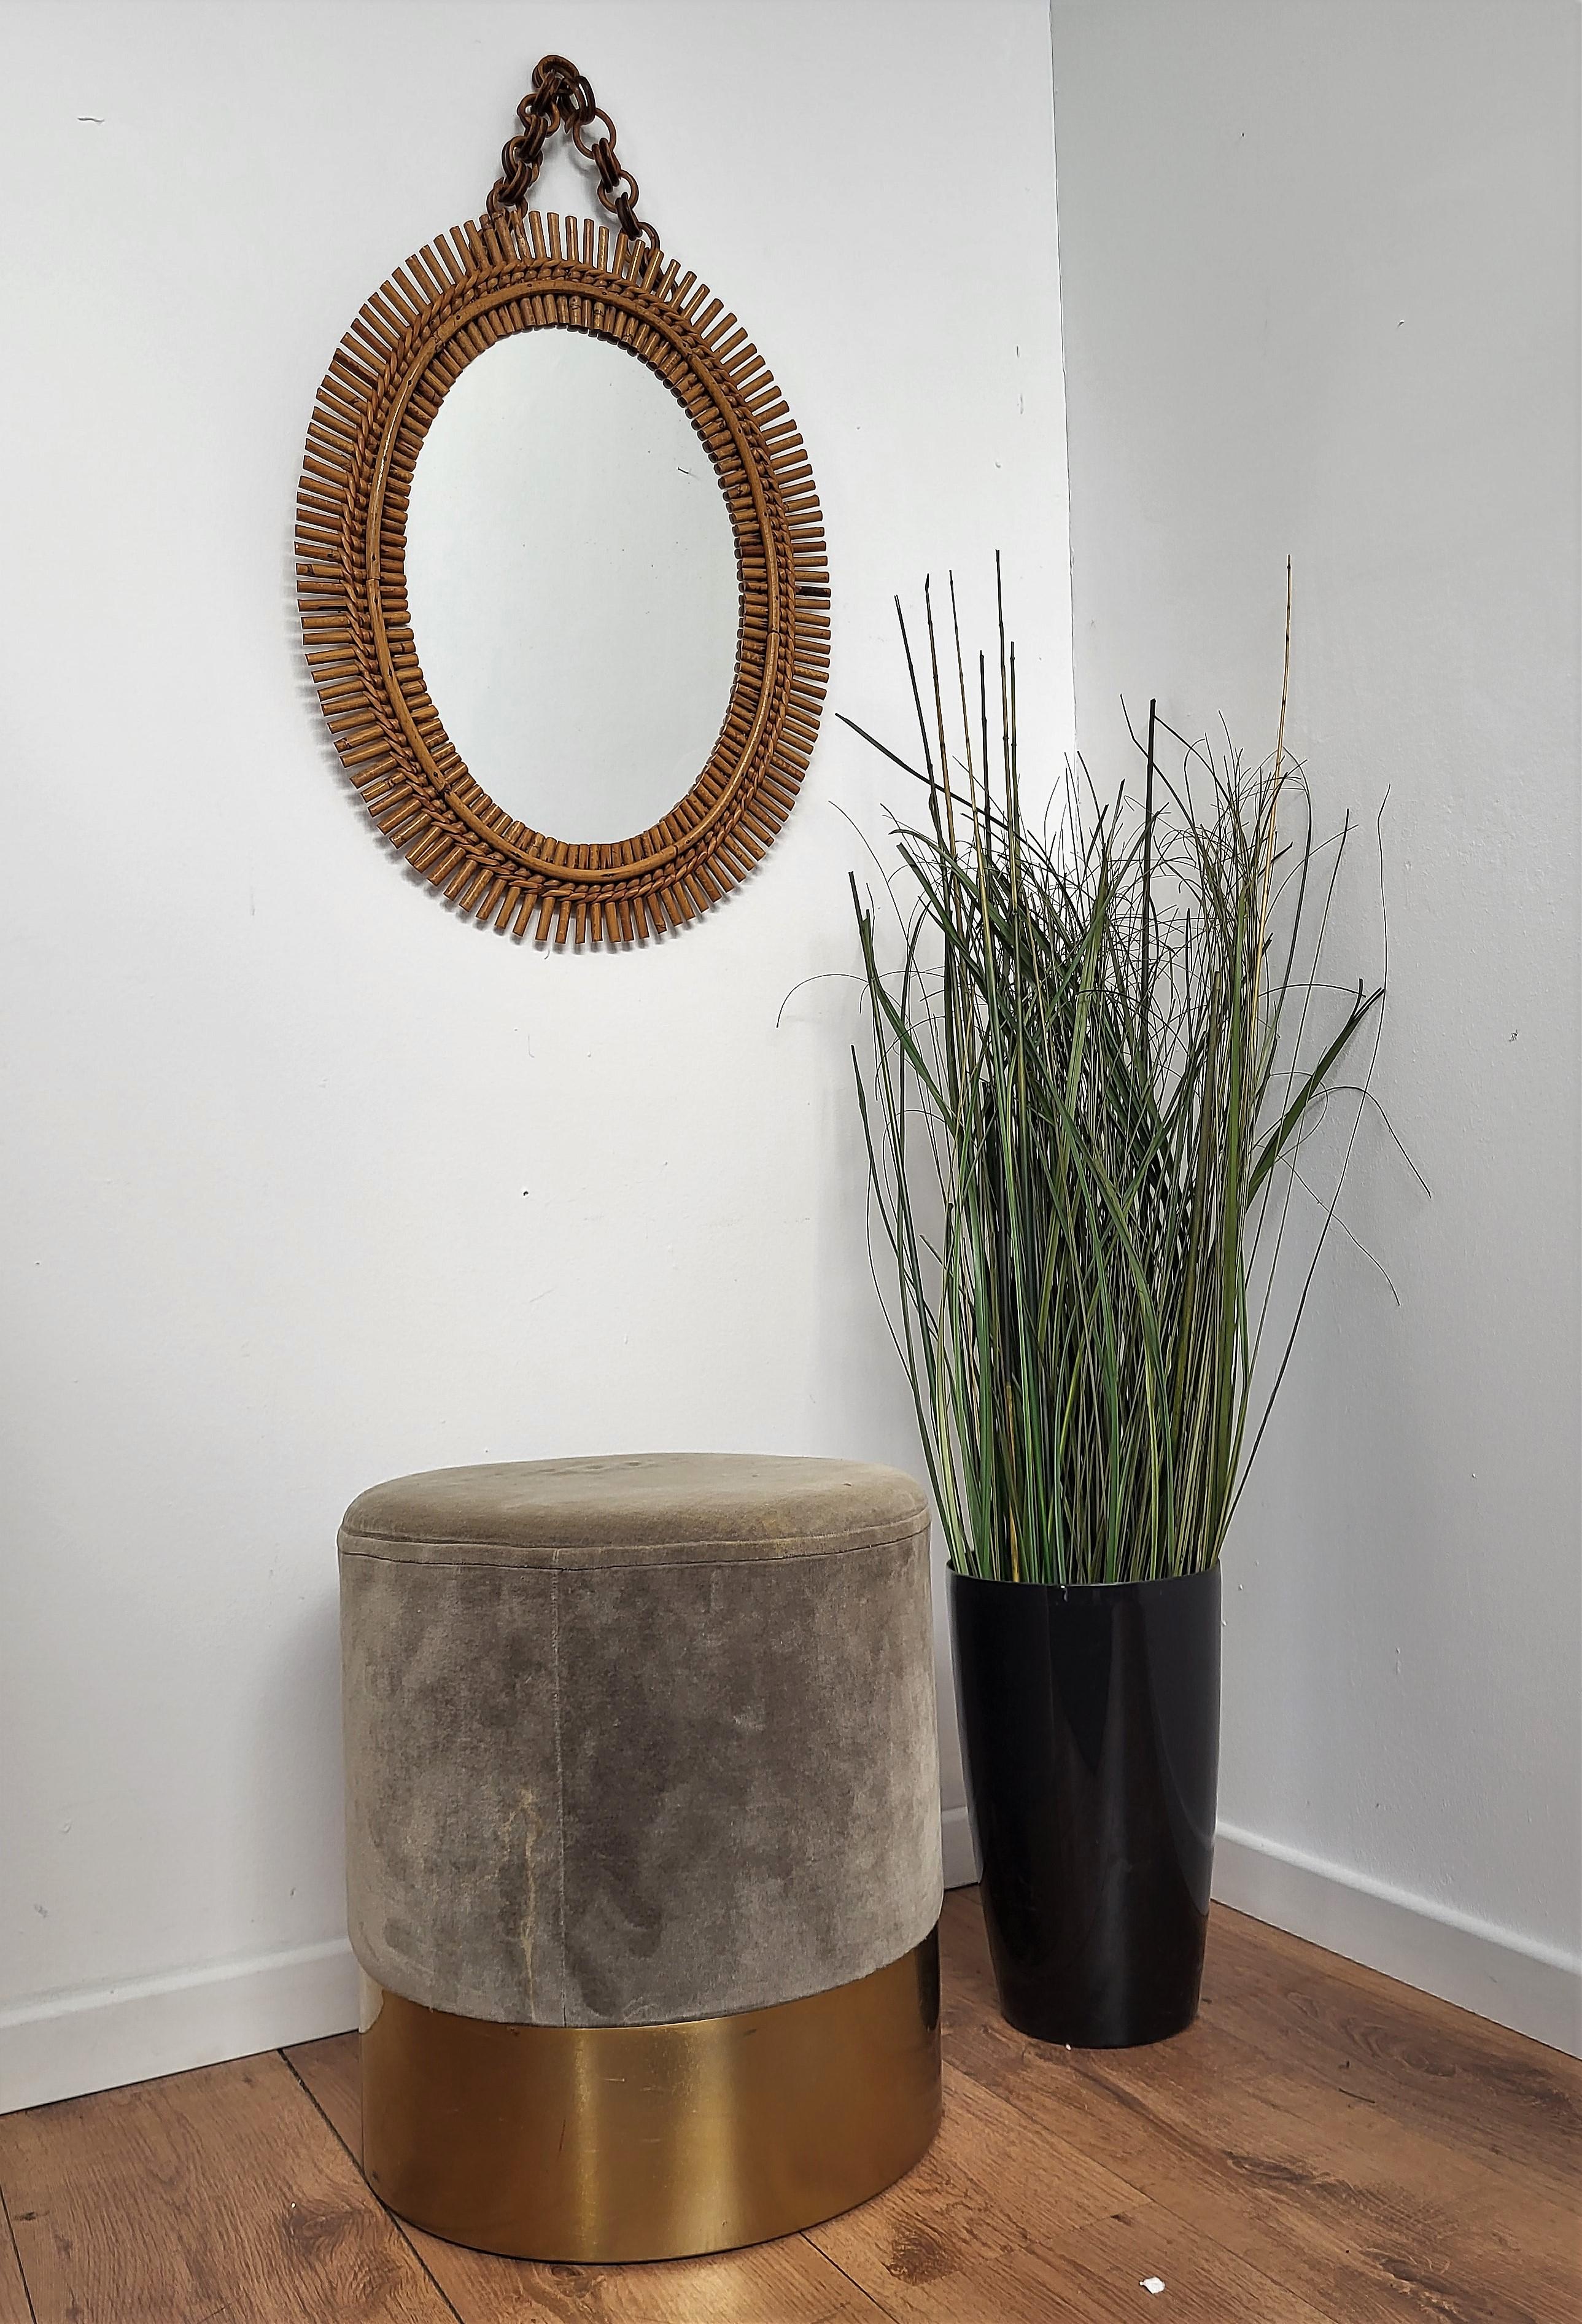 Beautiful 1970s Italian Mid-Century Modern oval shaped wall mirror made of rattan and bamboo with the typical bamboo chain. This charming piece is in the typical style of Franco Albini, Adrien Audoux and Vittorio Bonacina where the organic beauty of